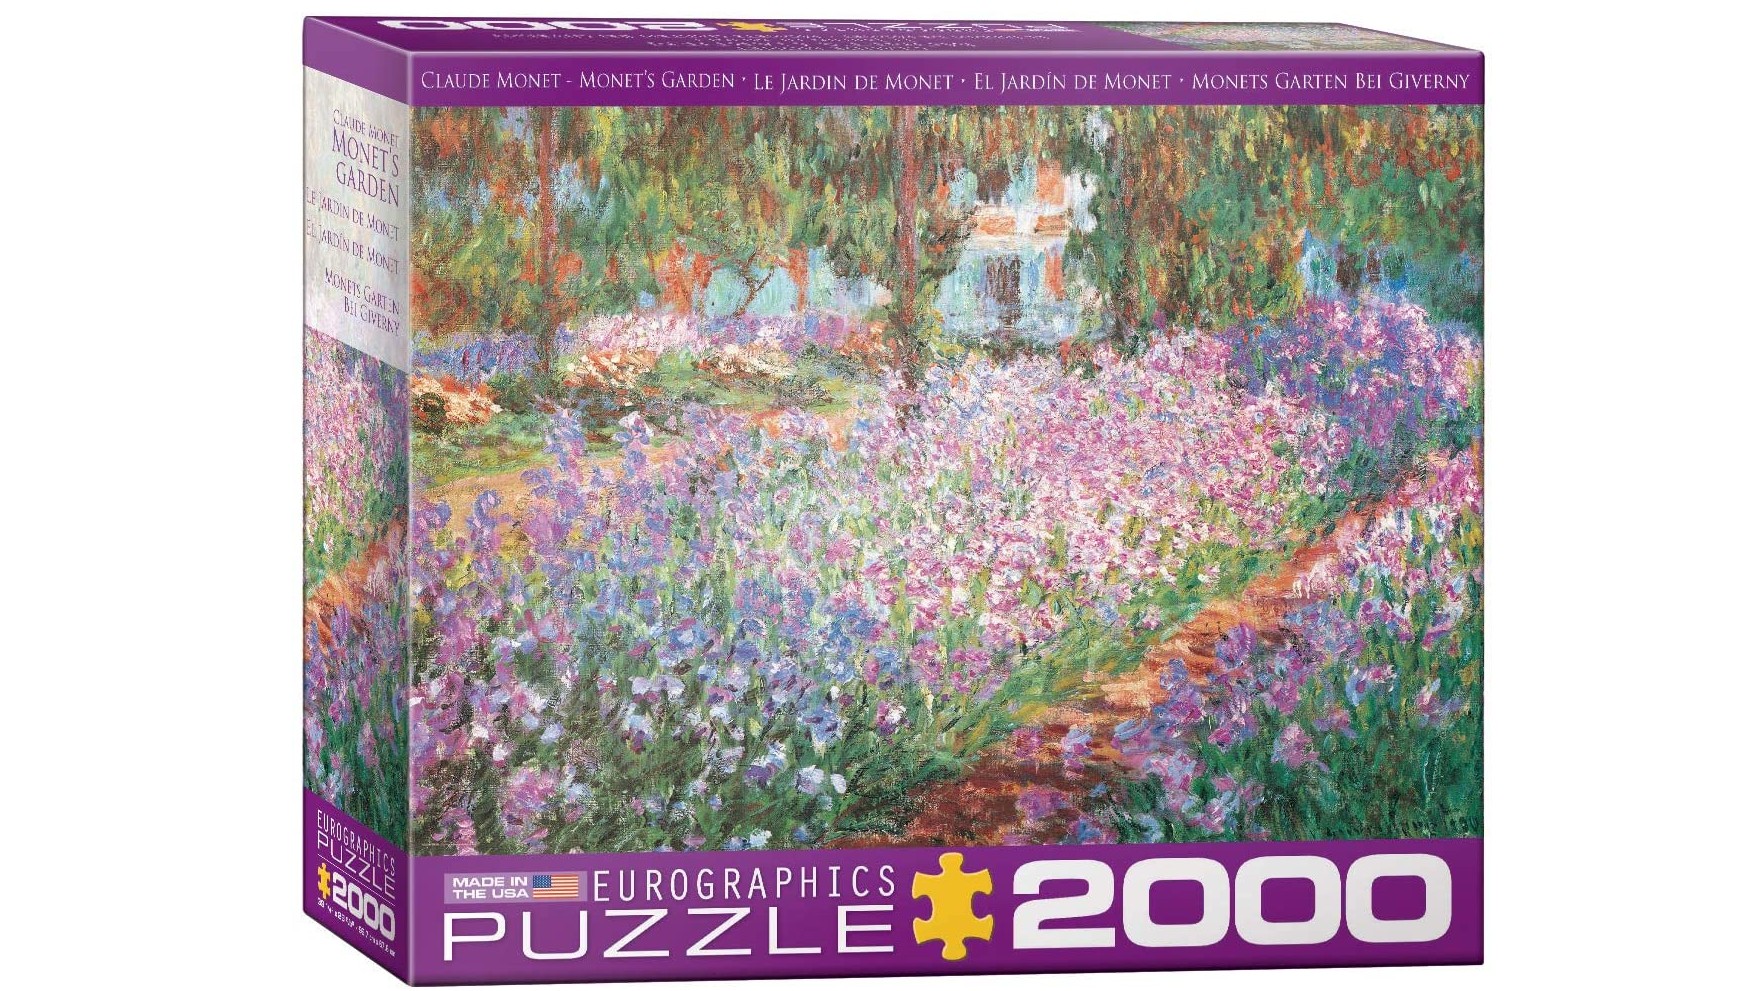 Jigsaw puzzle based on impressionist painting of a flower-filled garden